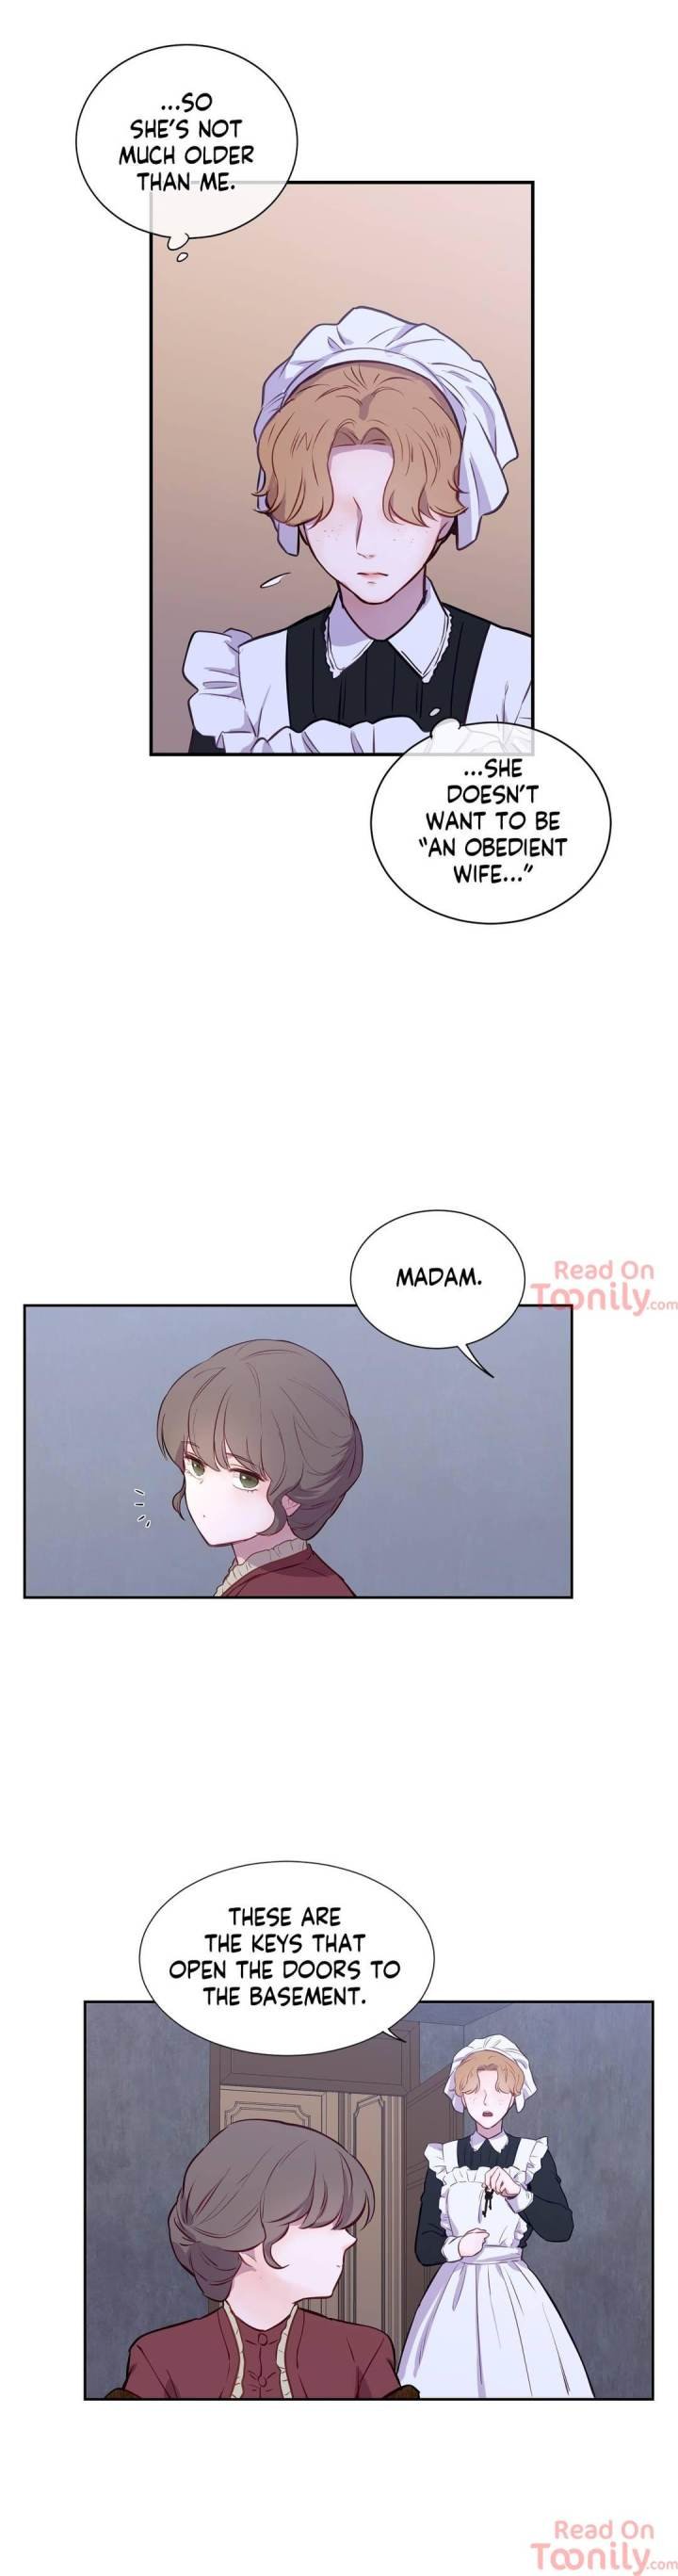 the-blood-of-madam-giselle-chap-3-17